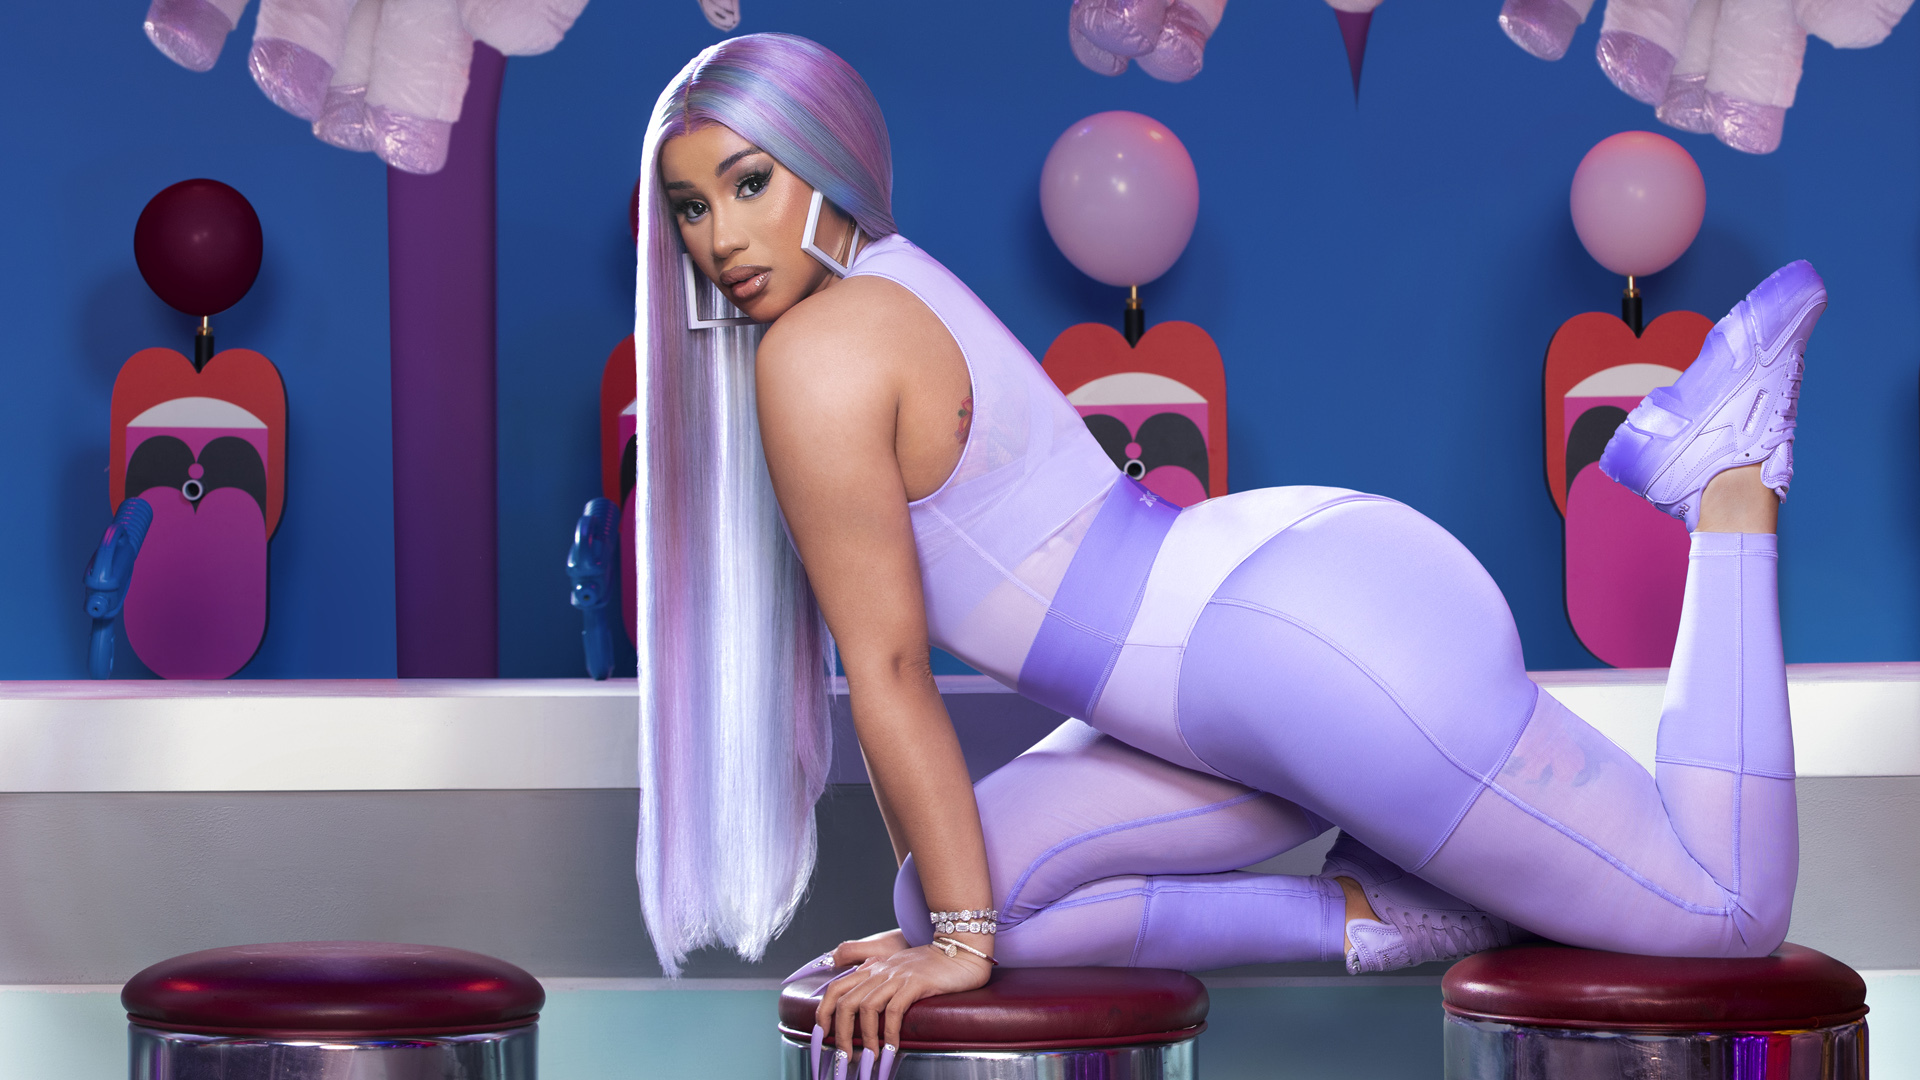 Cardi B, Reebok Partner to Launch First-Ever Apparel Collaboration For All Women